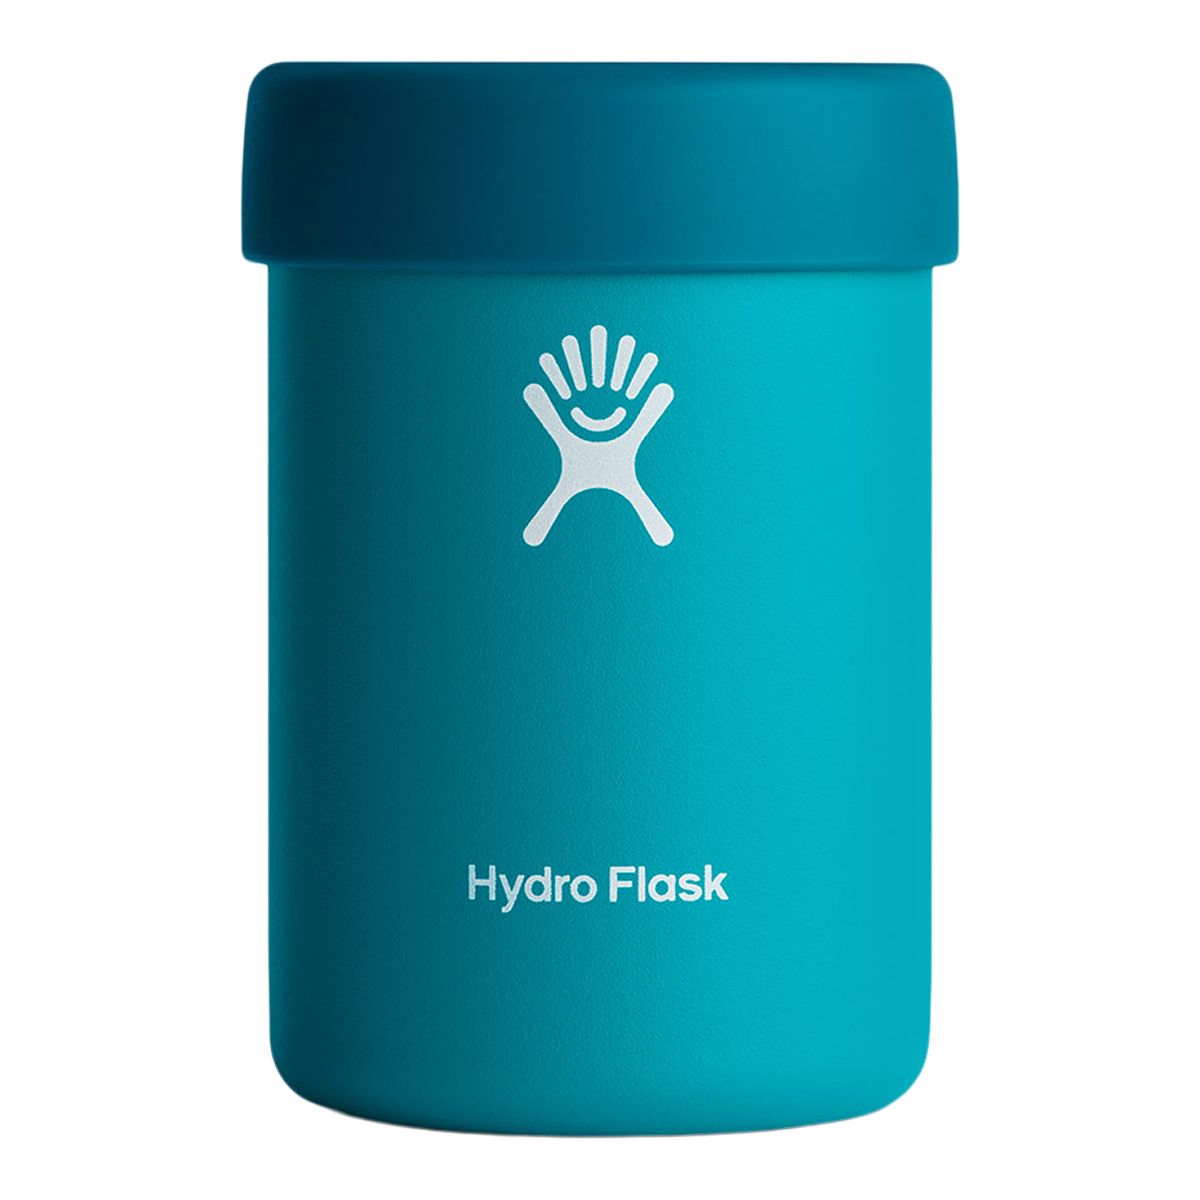 Hydroflask Cooler Cup 12 oz Can Sleeve/Koozie or  Insulated Stainless Steel